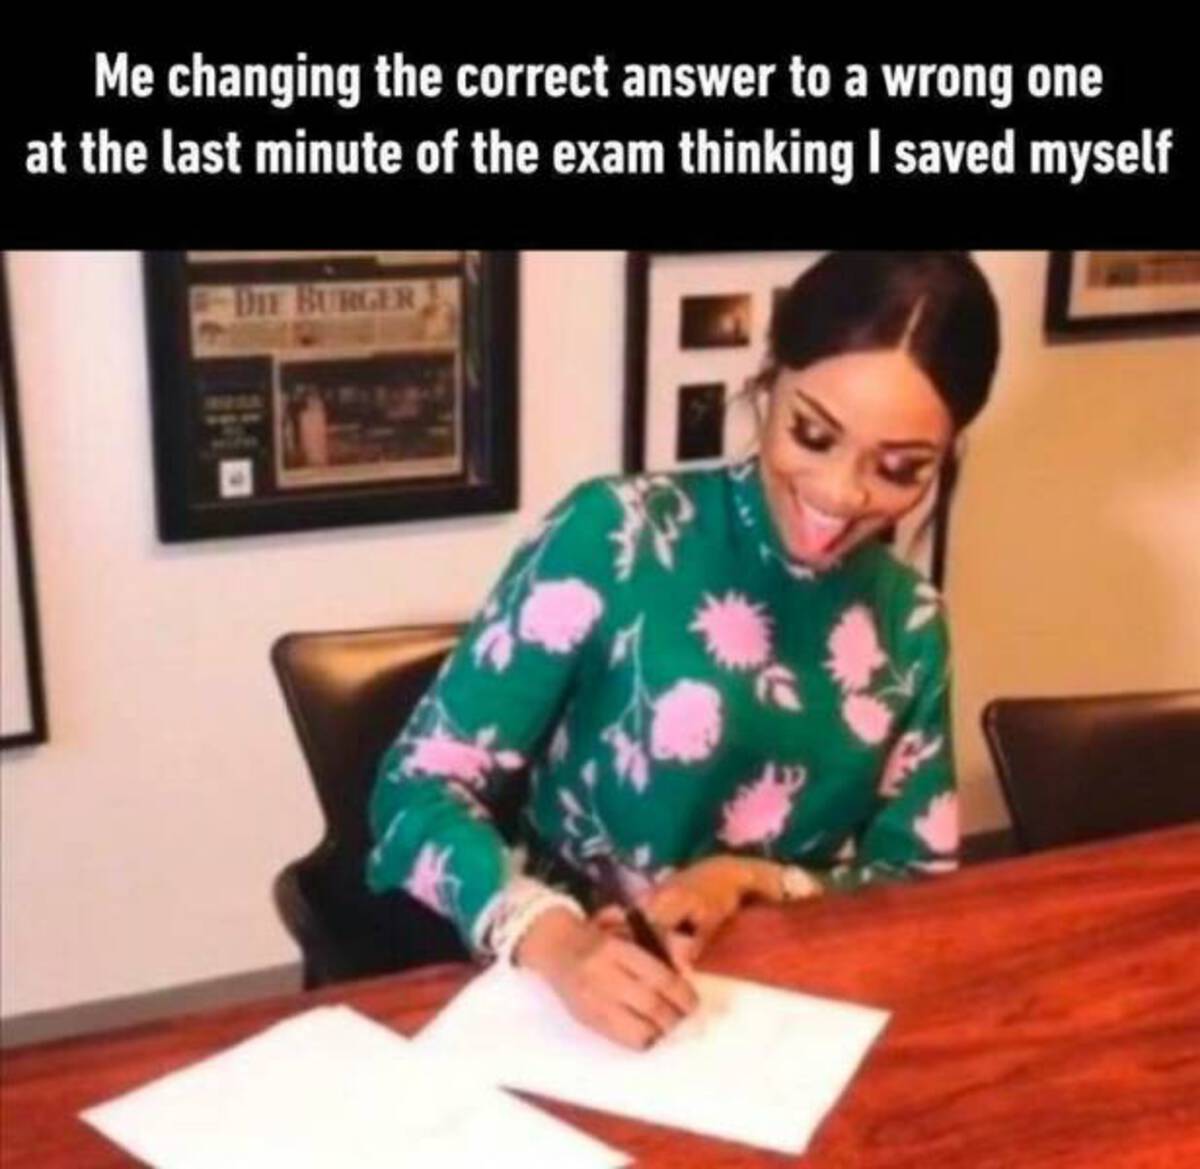 exam meme funny - Me changing the correct answer to a wrong one at the last minute of the exam thinking I saved myself Die Burger